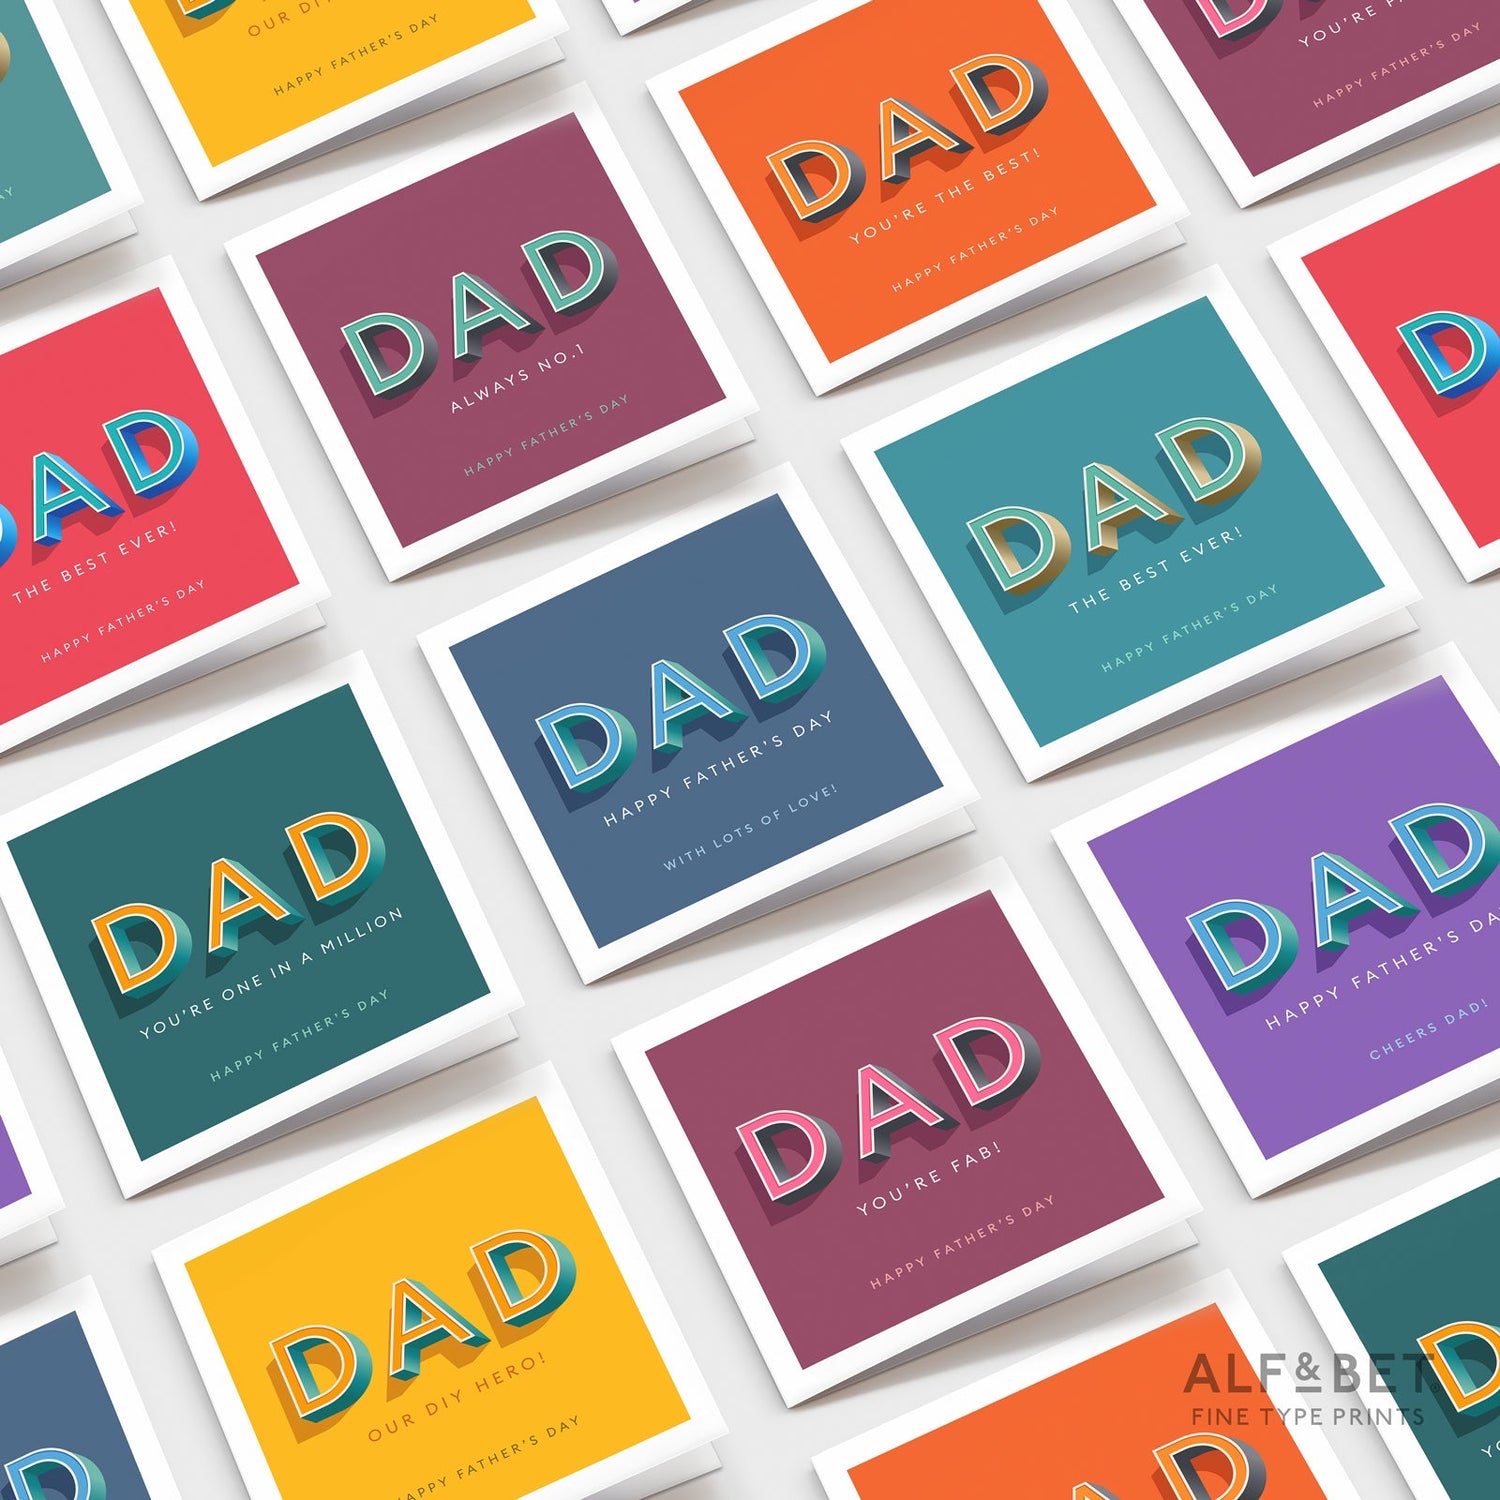 Personalised Father’s Day cards